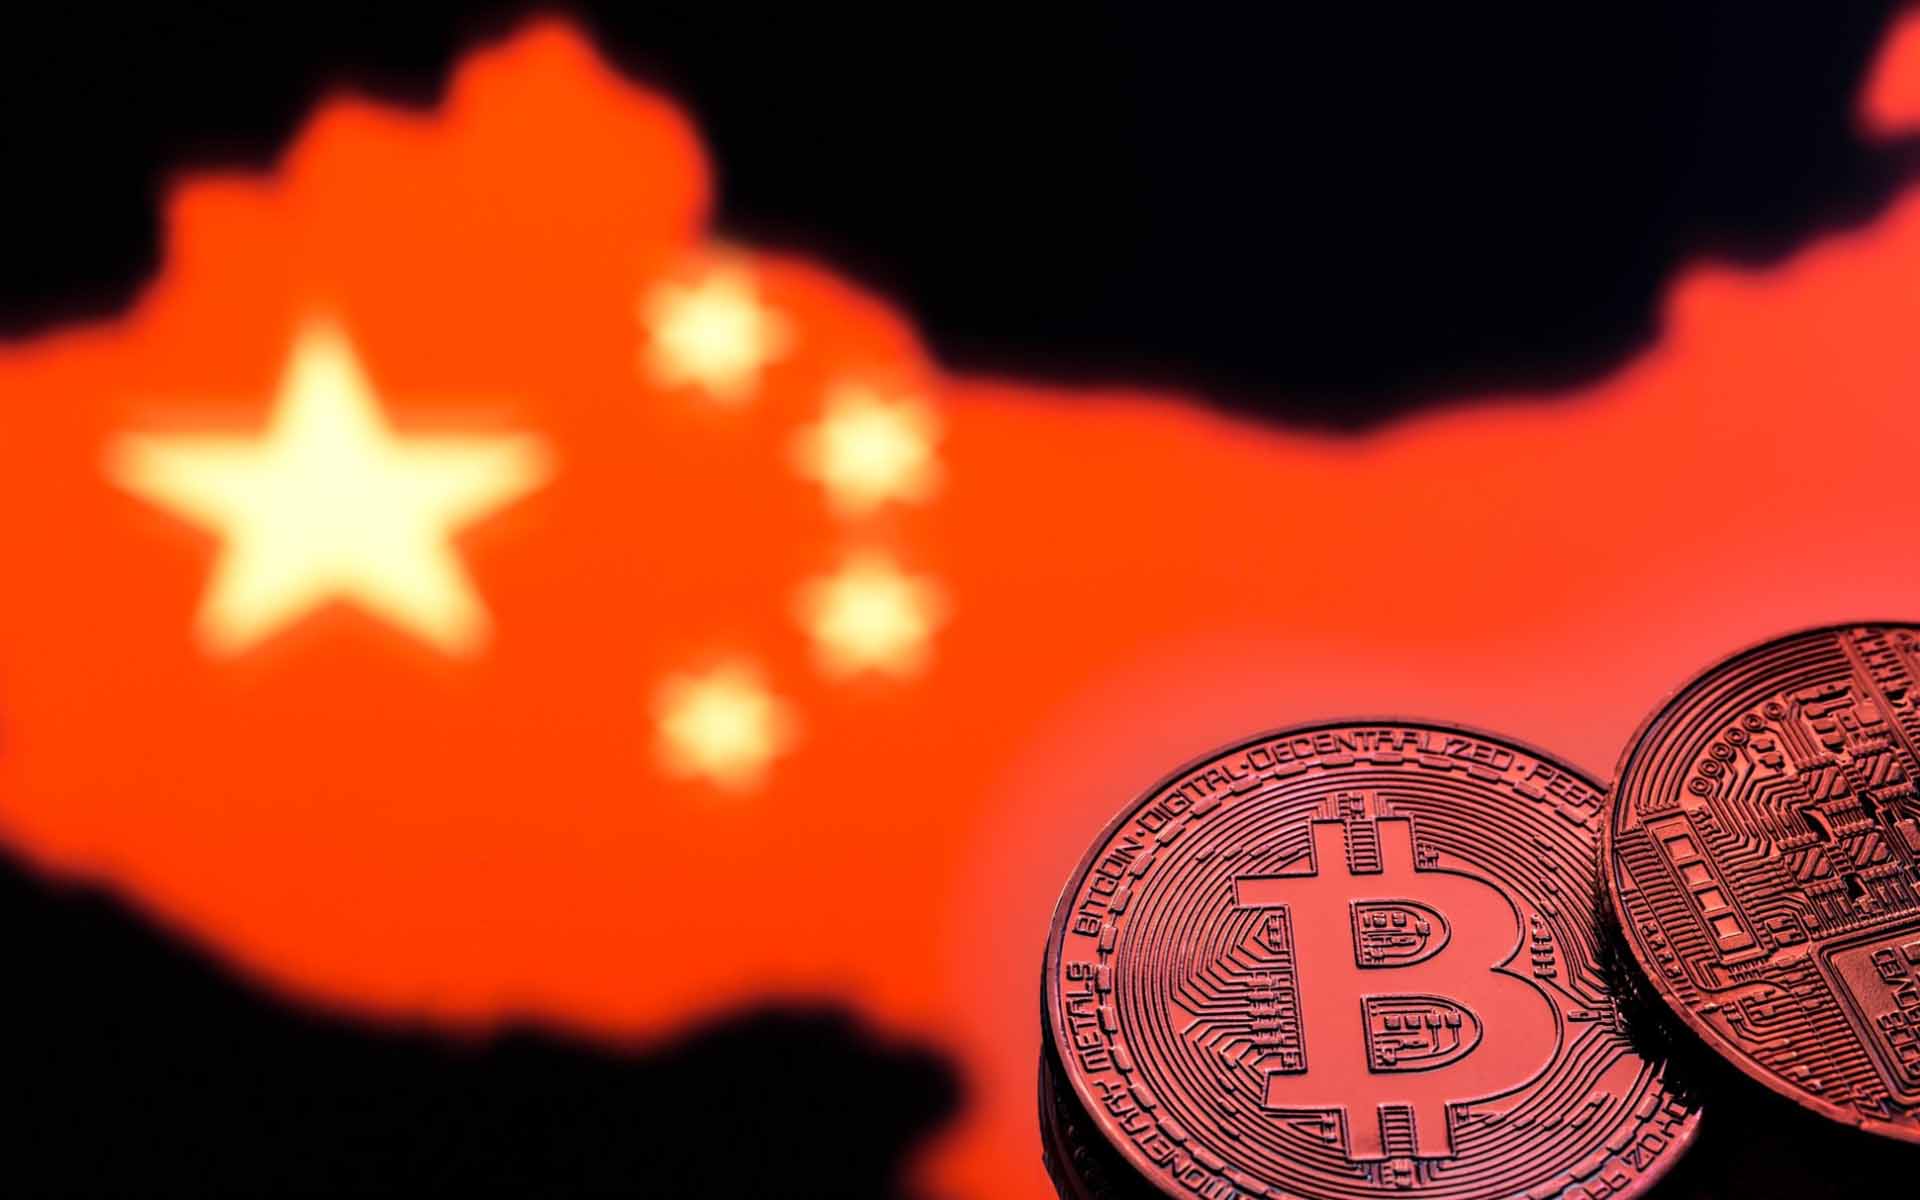 Chinese Bitcoin Investors Are Happily Paying a Markup For Tethers